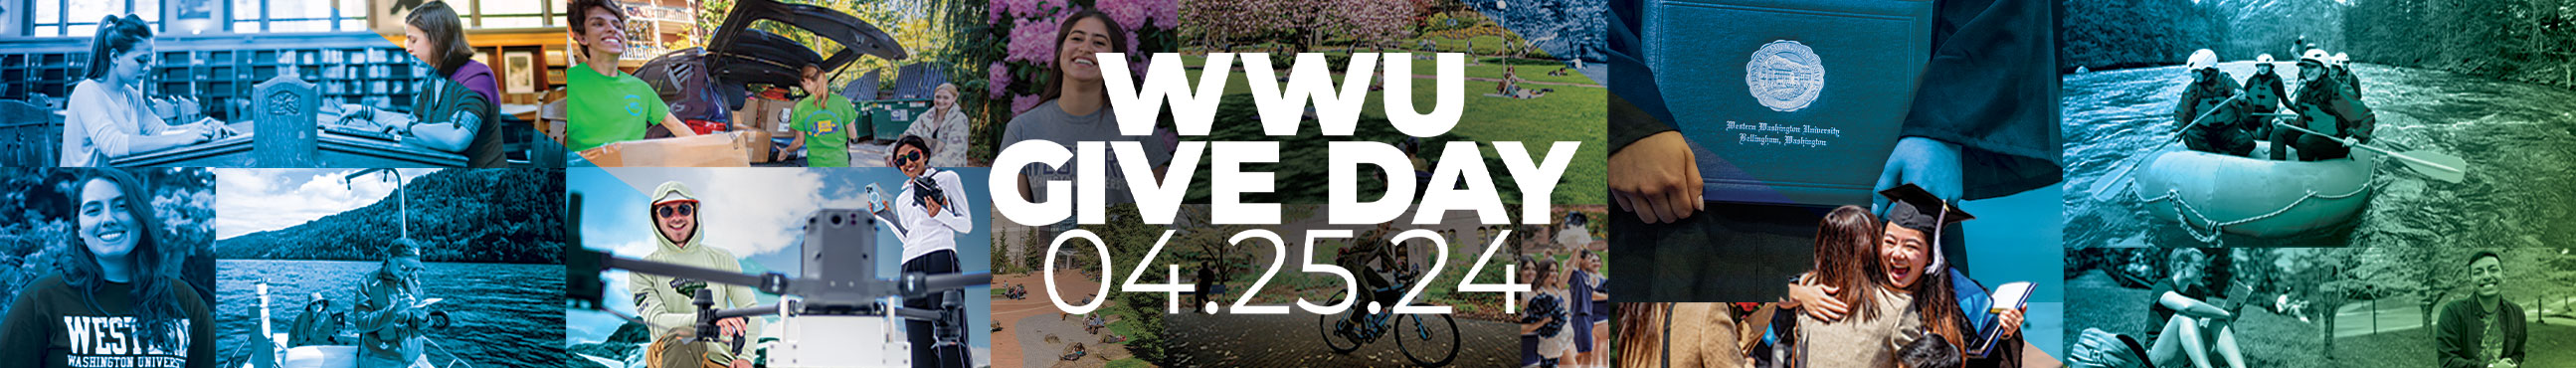 Collage of images of students doing various activities with text reading "WWU GIVE DAY 04.25.24"